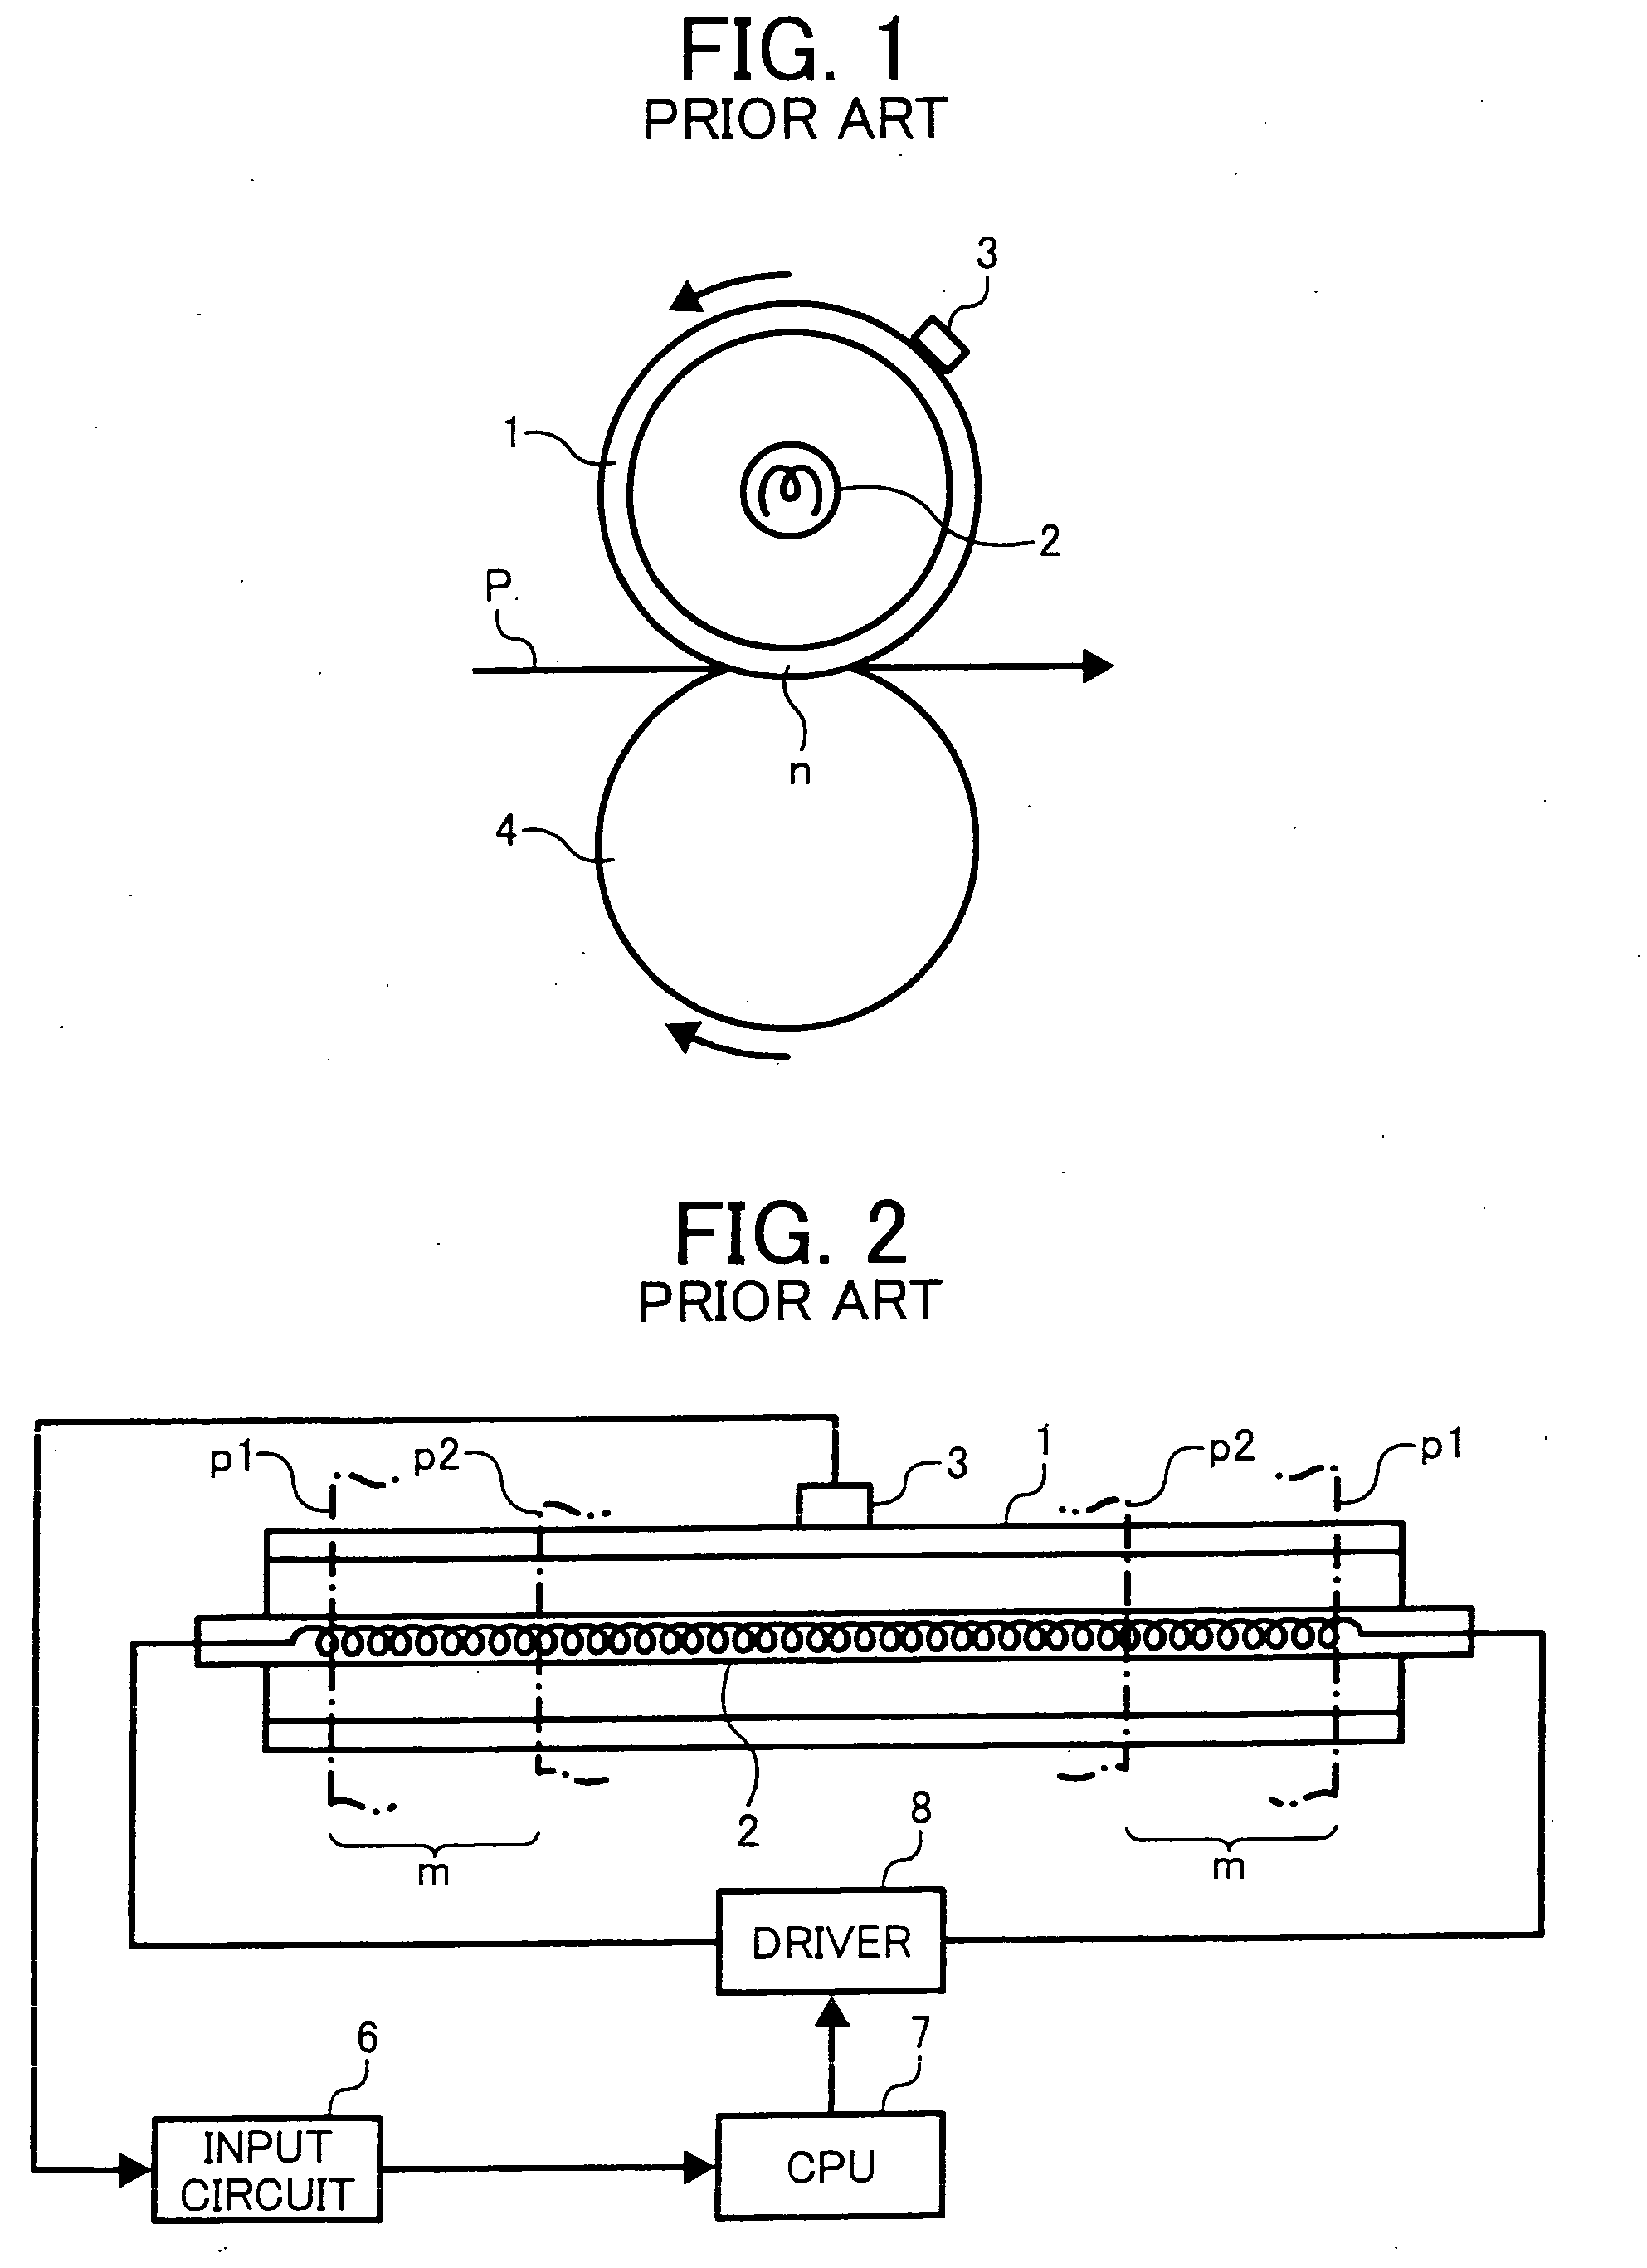 Image fixing apparatus, image forming apparatus, and image fixing method capable of effectively controlling an image fixing temperature